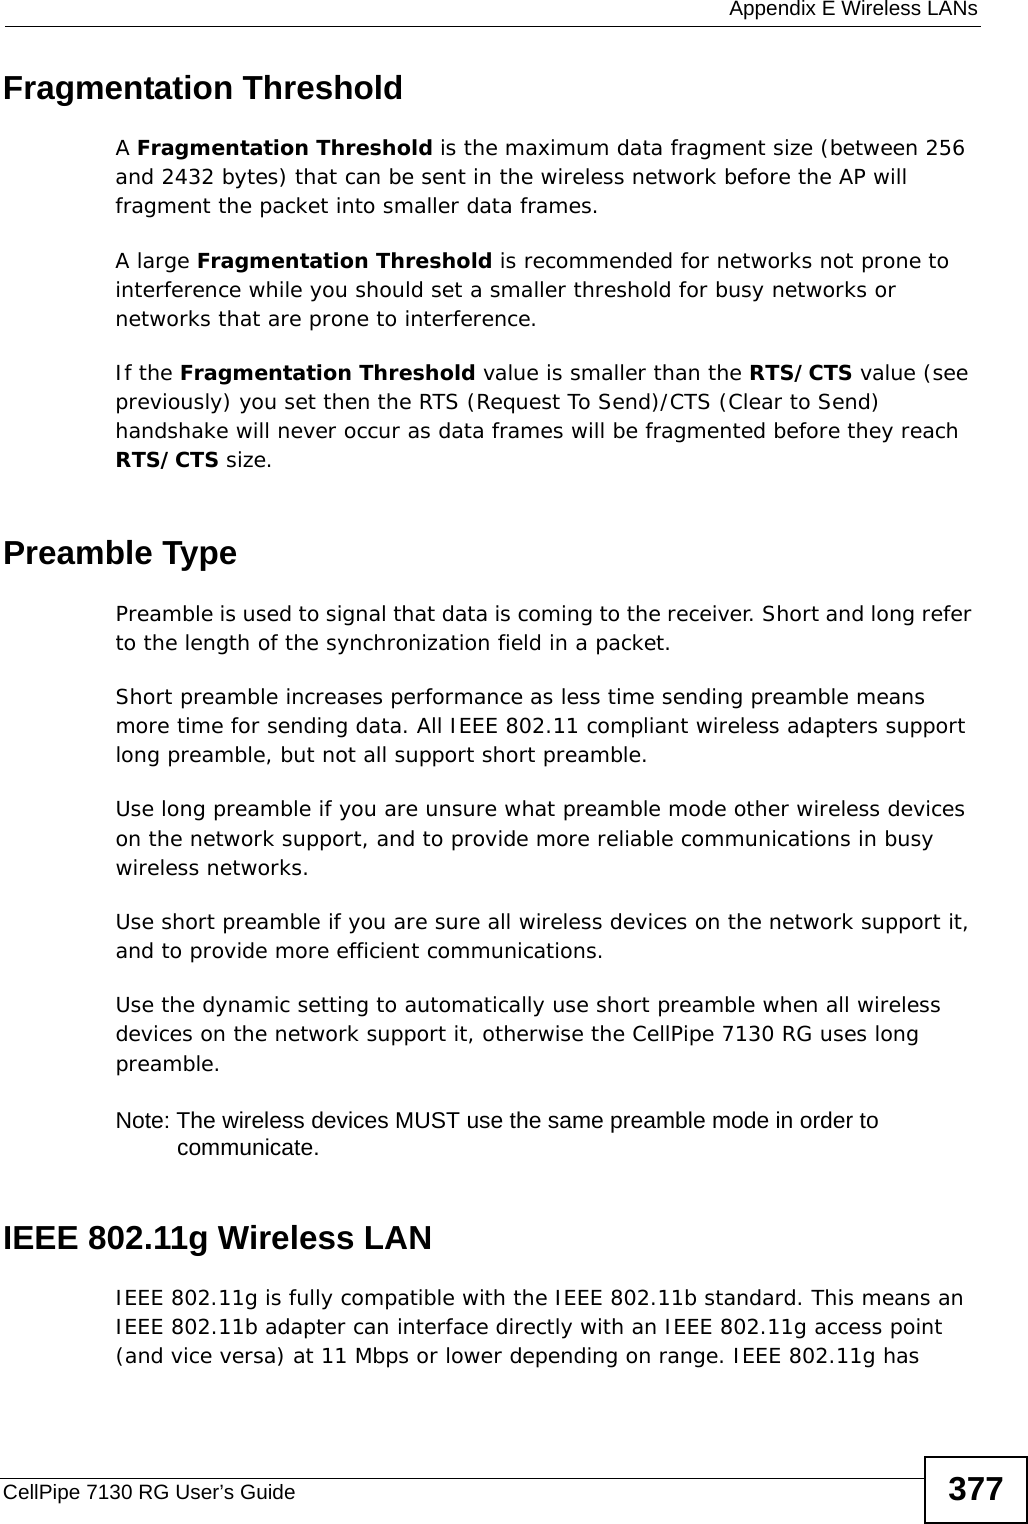  Appendix E Wireless LANsCellPipe 7130 RG User’s Guide 377Fragmentation ThresholdA Fragmentation Threshold is the maximum data fragment size (between 256 and 2432 bytes) that can be sent in the wireless network before the AP will fragment the packet into smaller data frames.A large Fragmentation Threshold is recommended for networks not prone to interference while you should set a smaller threshold for busy networks or networks that are prone to interference.If the Fragmentation Threshold value is smaller than the RTS/CTS value (see previously) you set then the RTS (Request To Send)/CTS (Clear to Send) handshake will never occur as data frames will be fragmented before they reach RTS/CTS size.Preamble TypePreamble is used to signal that data is coming to the receiver. Short and long refer to the length of the synchronization field in a packet.Short preamble increases performance as less time sending preamble means more time for sending data. All IEEE 802.11 compliant wireless adapters support long preamble, but not all support short preamble. Use long preamble if you are unsure what preamble mode other wireless devices on the network support, and to provide more reliable communications in busy wireless networks. Use short preamble if you are sure all wireless devices on the network support it, and to provide more efficient communications.Use the dynamic setting to automatically use short preamble when all wireless devices on the network support it, otherwise the CellPipe 7130 RG uses long preamble.Note: The wireless devices MUST use the same preamble mode in order to communicate.IEEE 802.11g Wireless LANIEEE 802.11g is fully compatible with the IEEE 802.11b standard. This means an IEEE 802.11b adapter can interface directly with an IEEE 802.11g access point (and vice versa) at 11 Mbps or lower depending on range. IEEE 802.11g has 